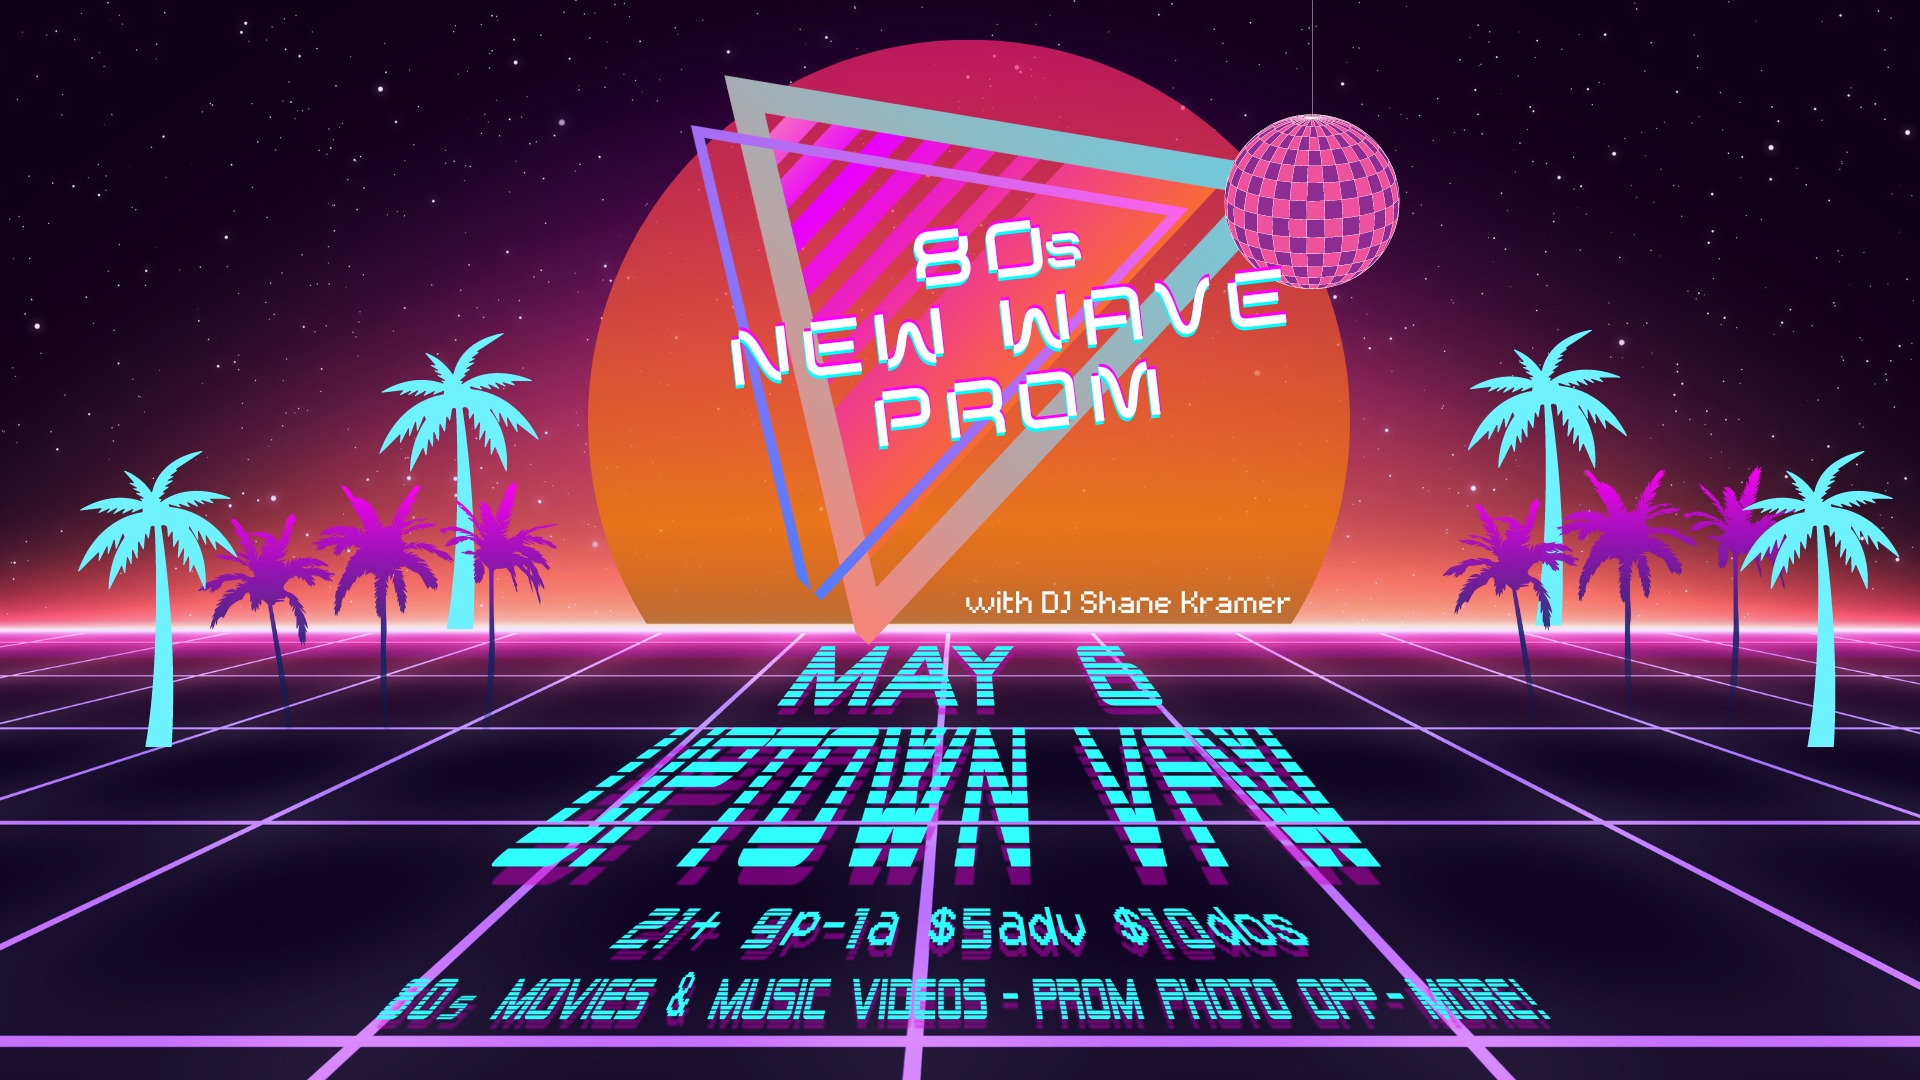 An 80s New Wave Prom! DJ Shane Kramer Friday, May 6 James Ballentine "Uptown" VFW Post 246 Doors 9:00pm :: Music 9:00pm :: 21+ GA $5 ADV / $10 DOS NO REFUNDS